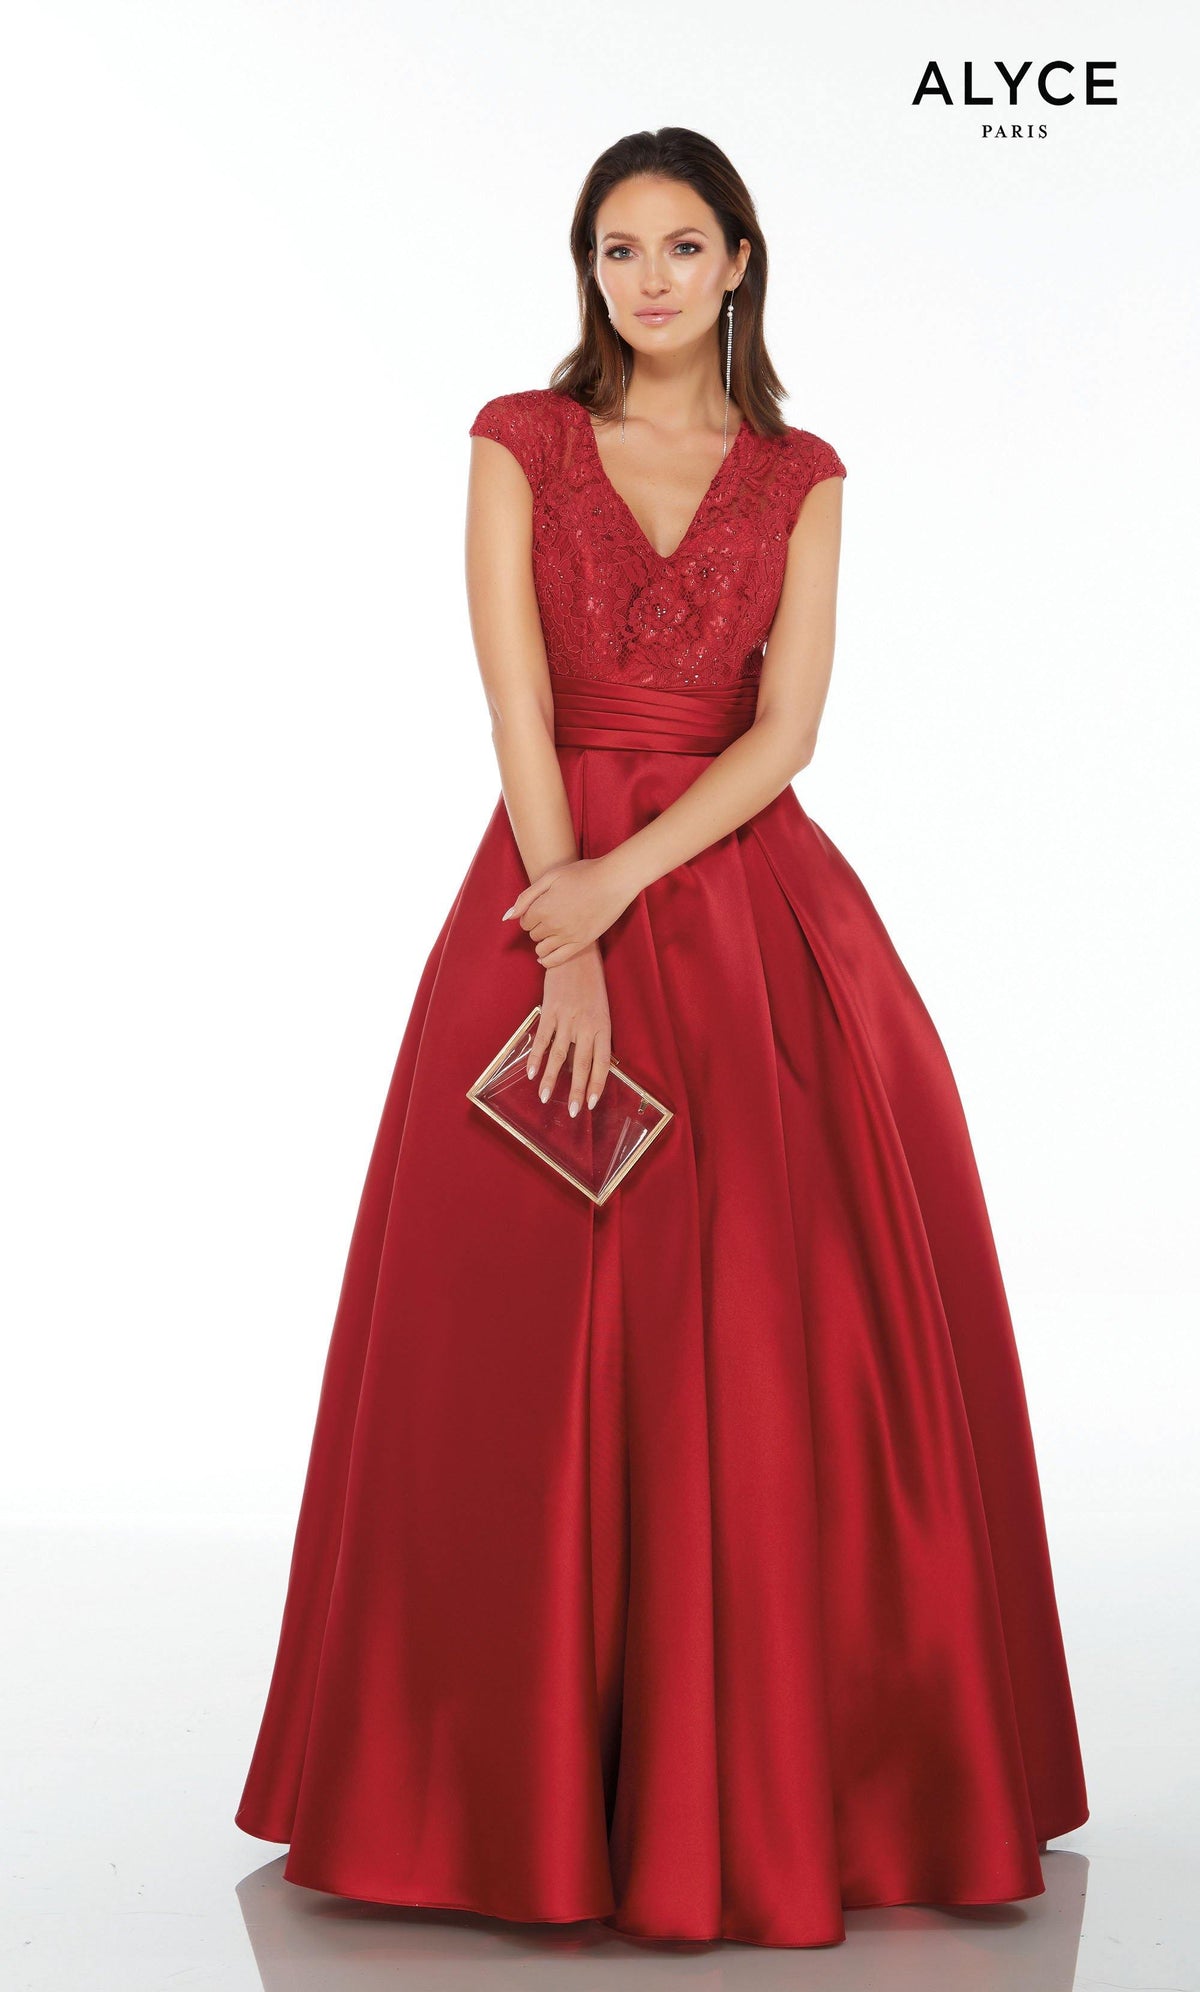 Red mikado formal ball gown with a V-neckline, lace bodice, and cap sleeves